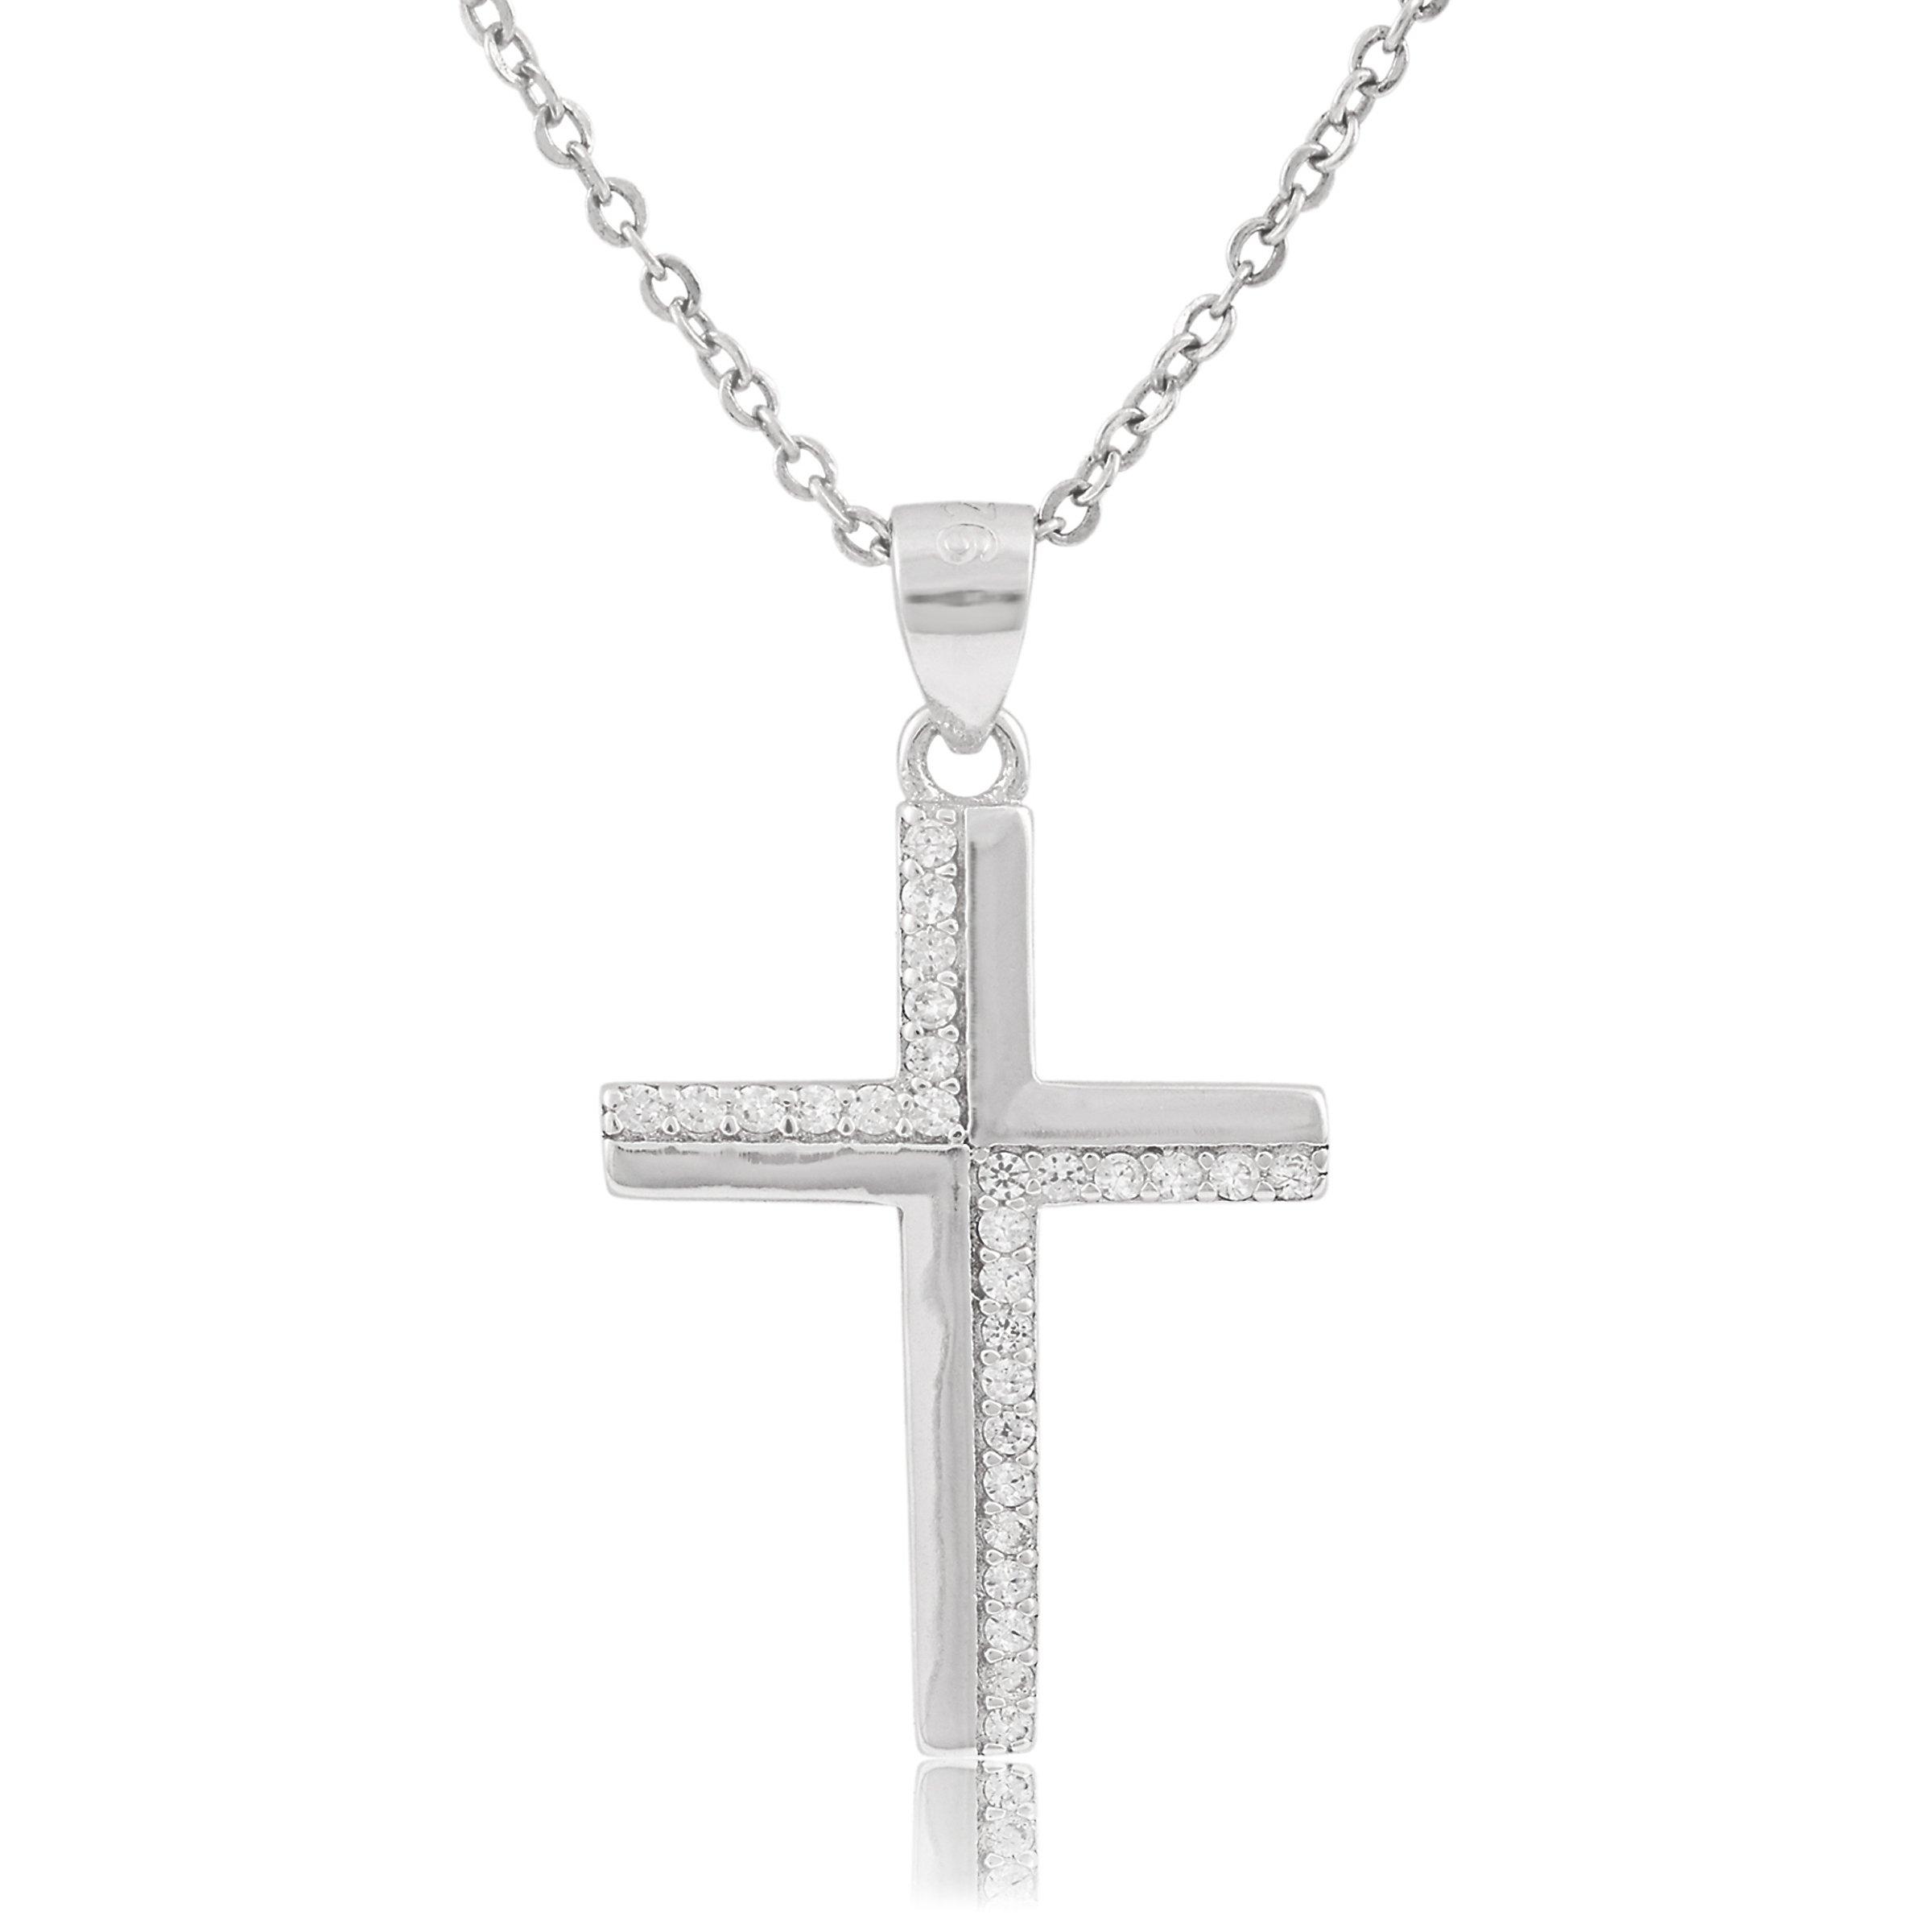 Buy Sterling Silver Large Cross on Chain Online | Truworths